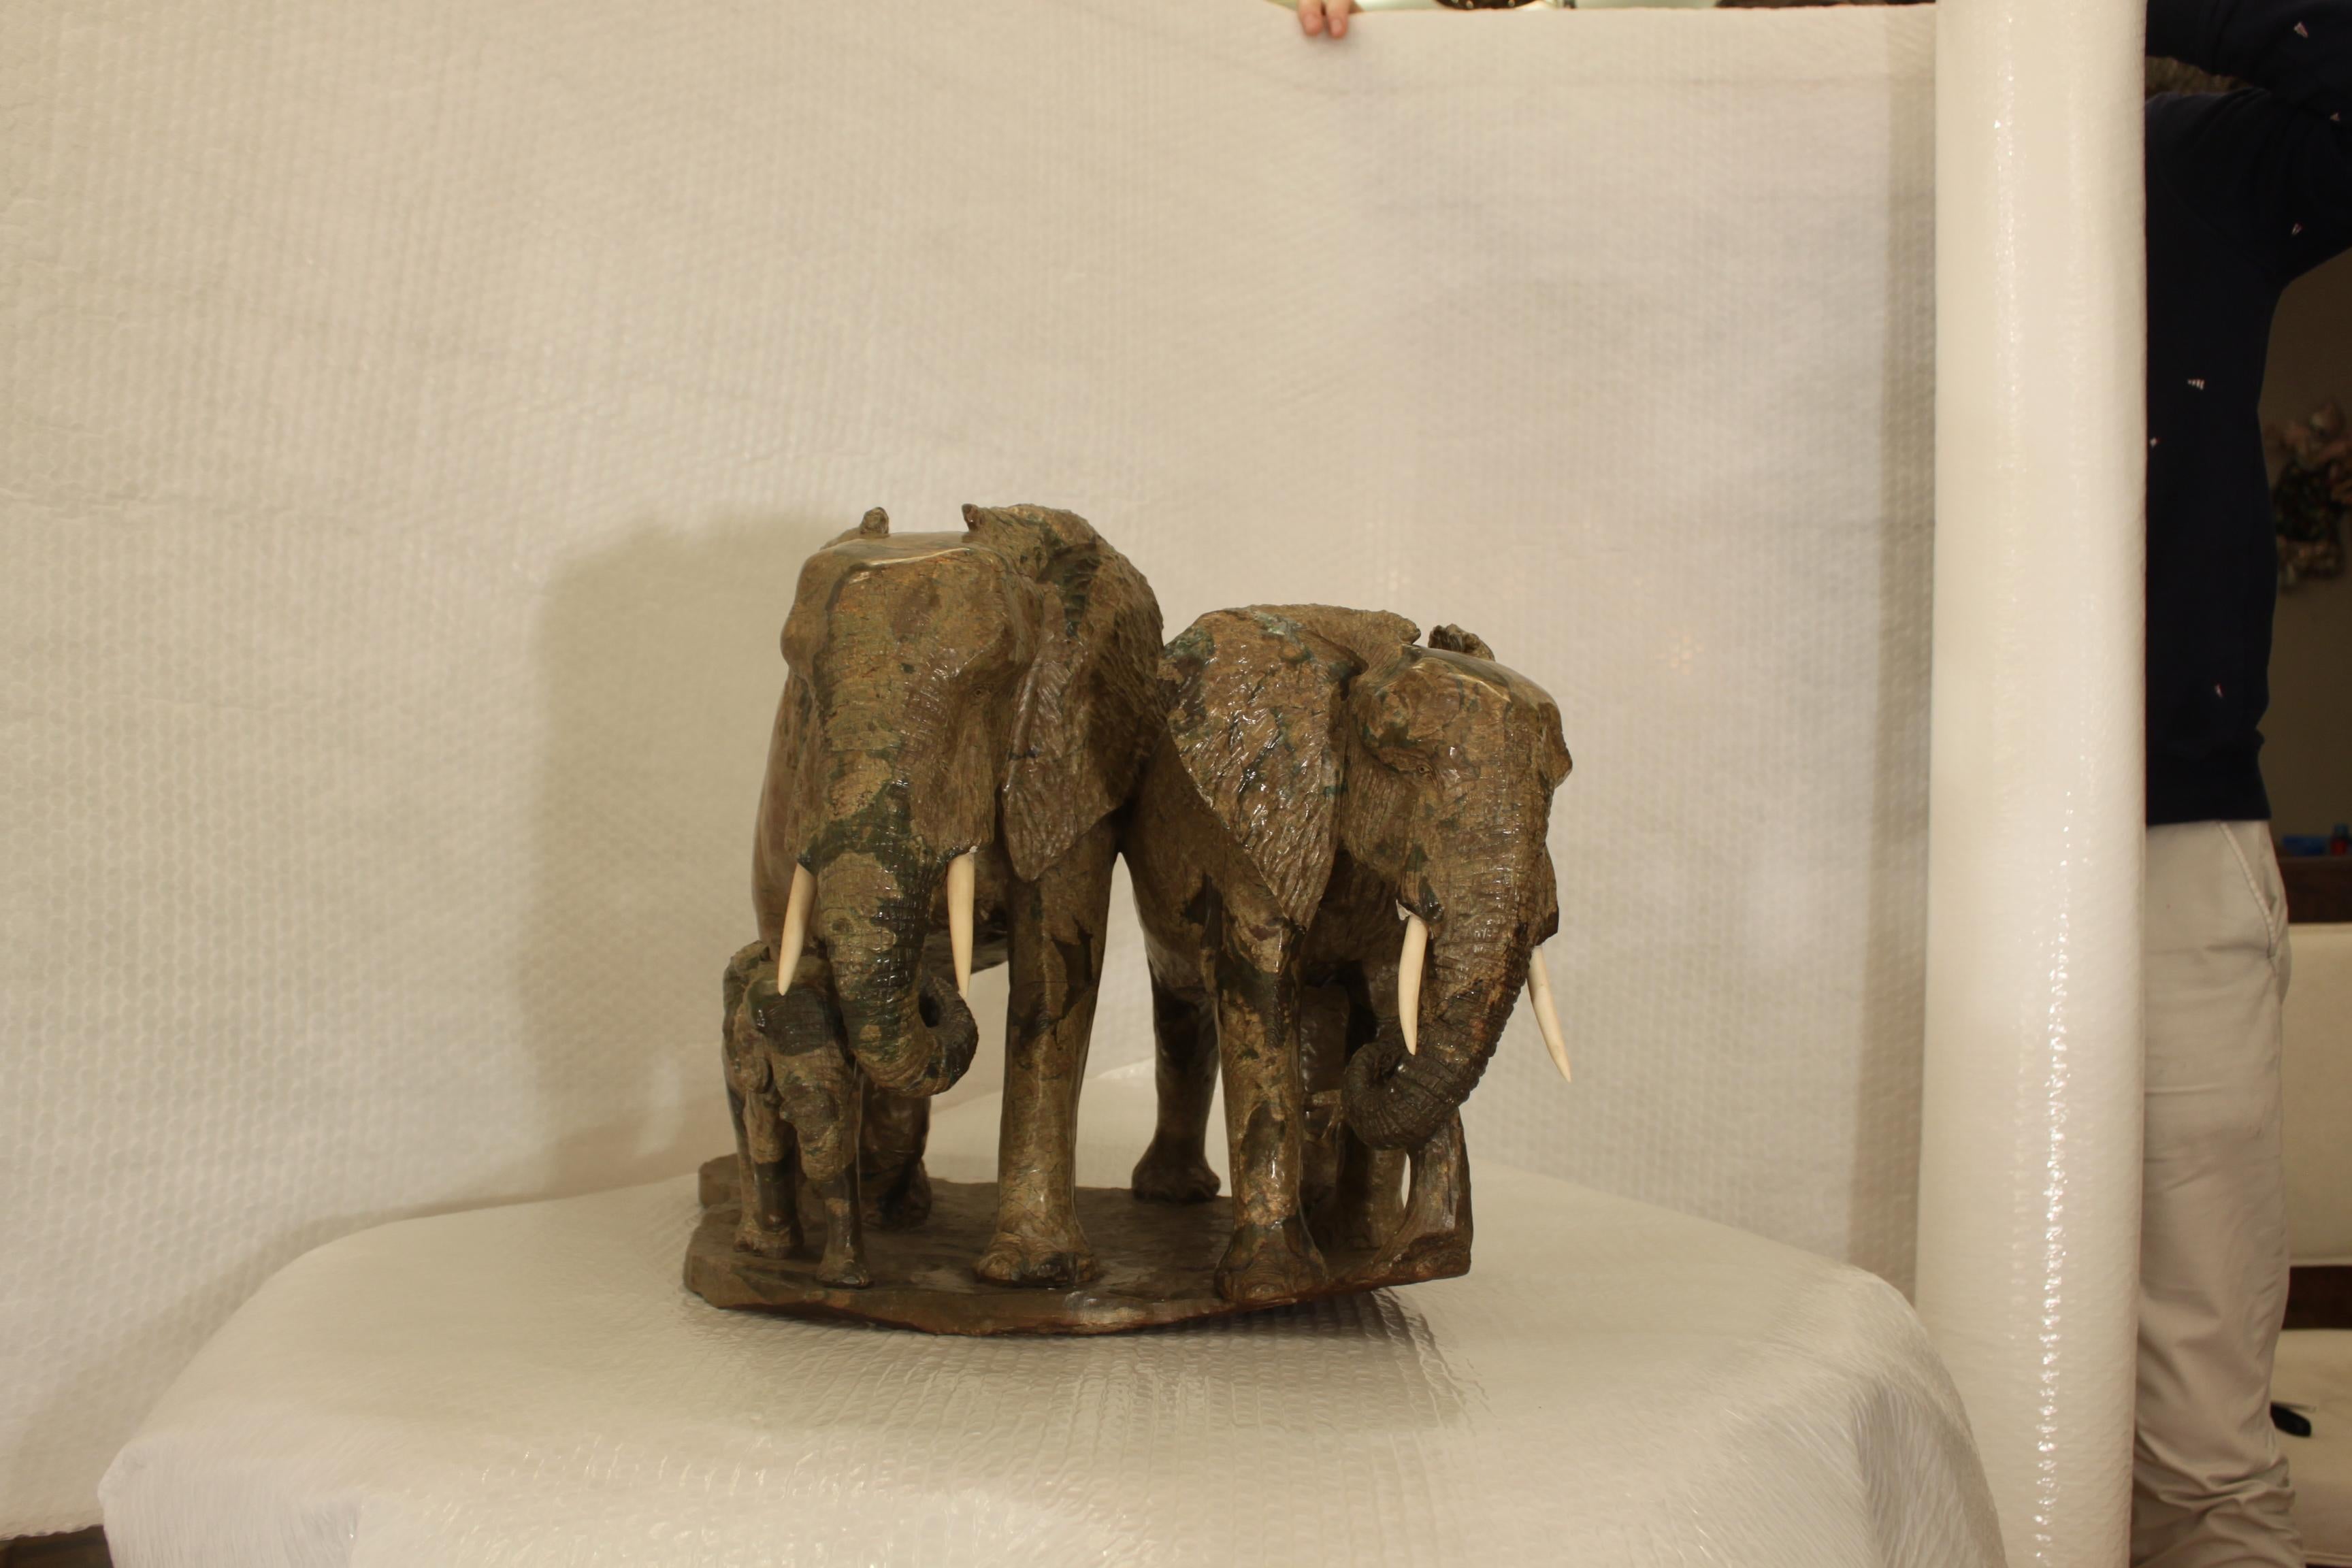 Lovely  marble elephant family, father, mother and baby. Made of Verdite - a type of green metamorphic rock largely made up of fuchsite and fine grain clay.  Sculptors mark in the stonework. 